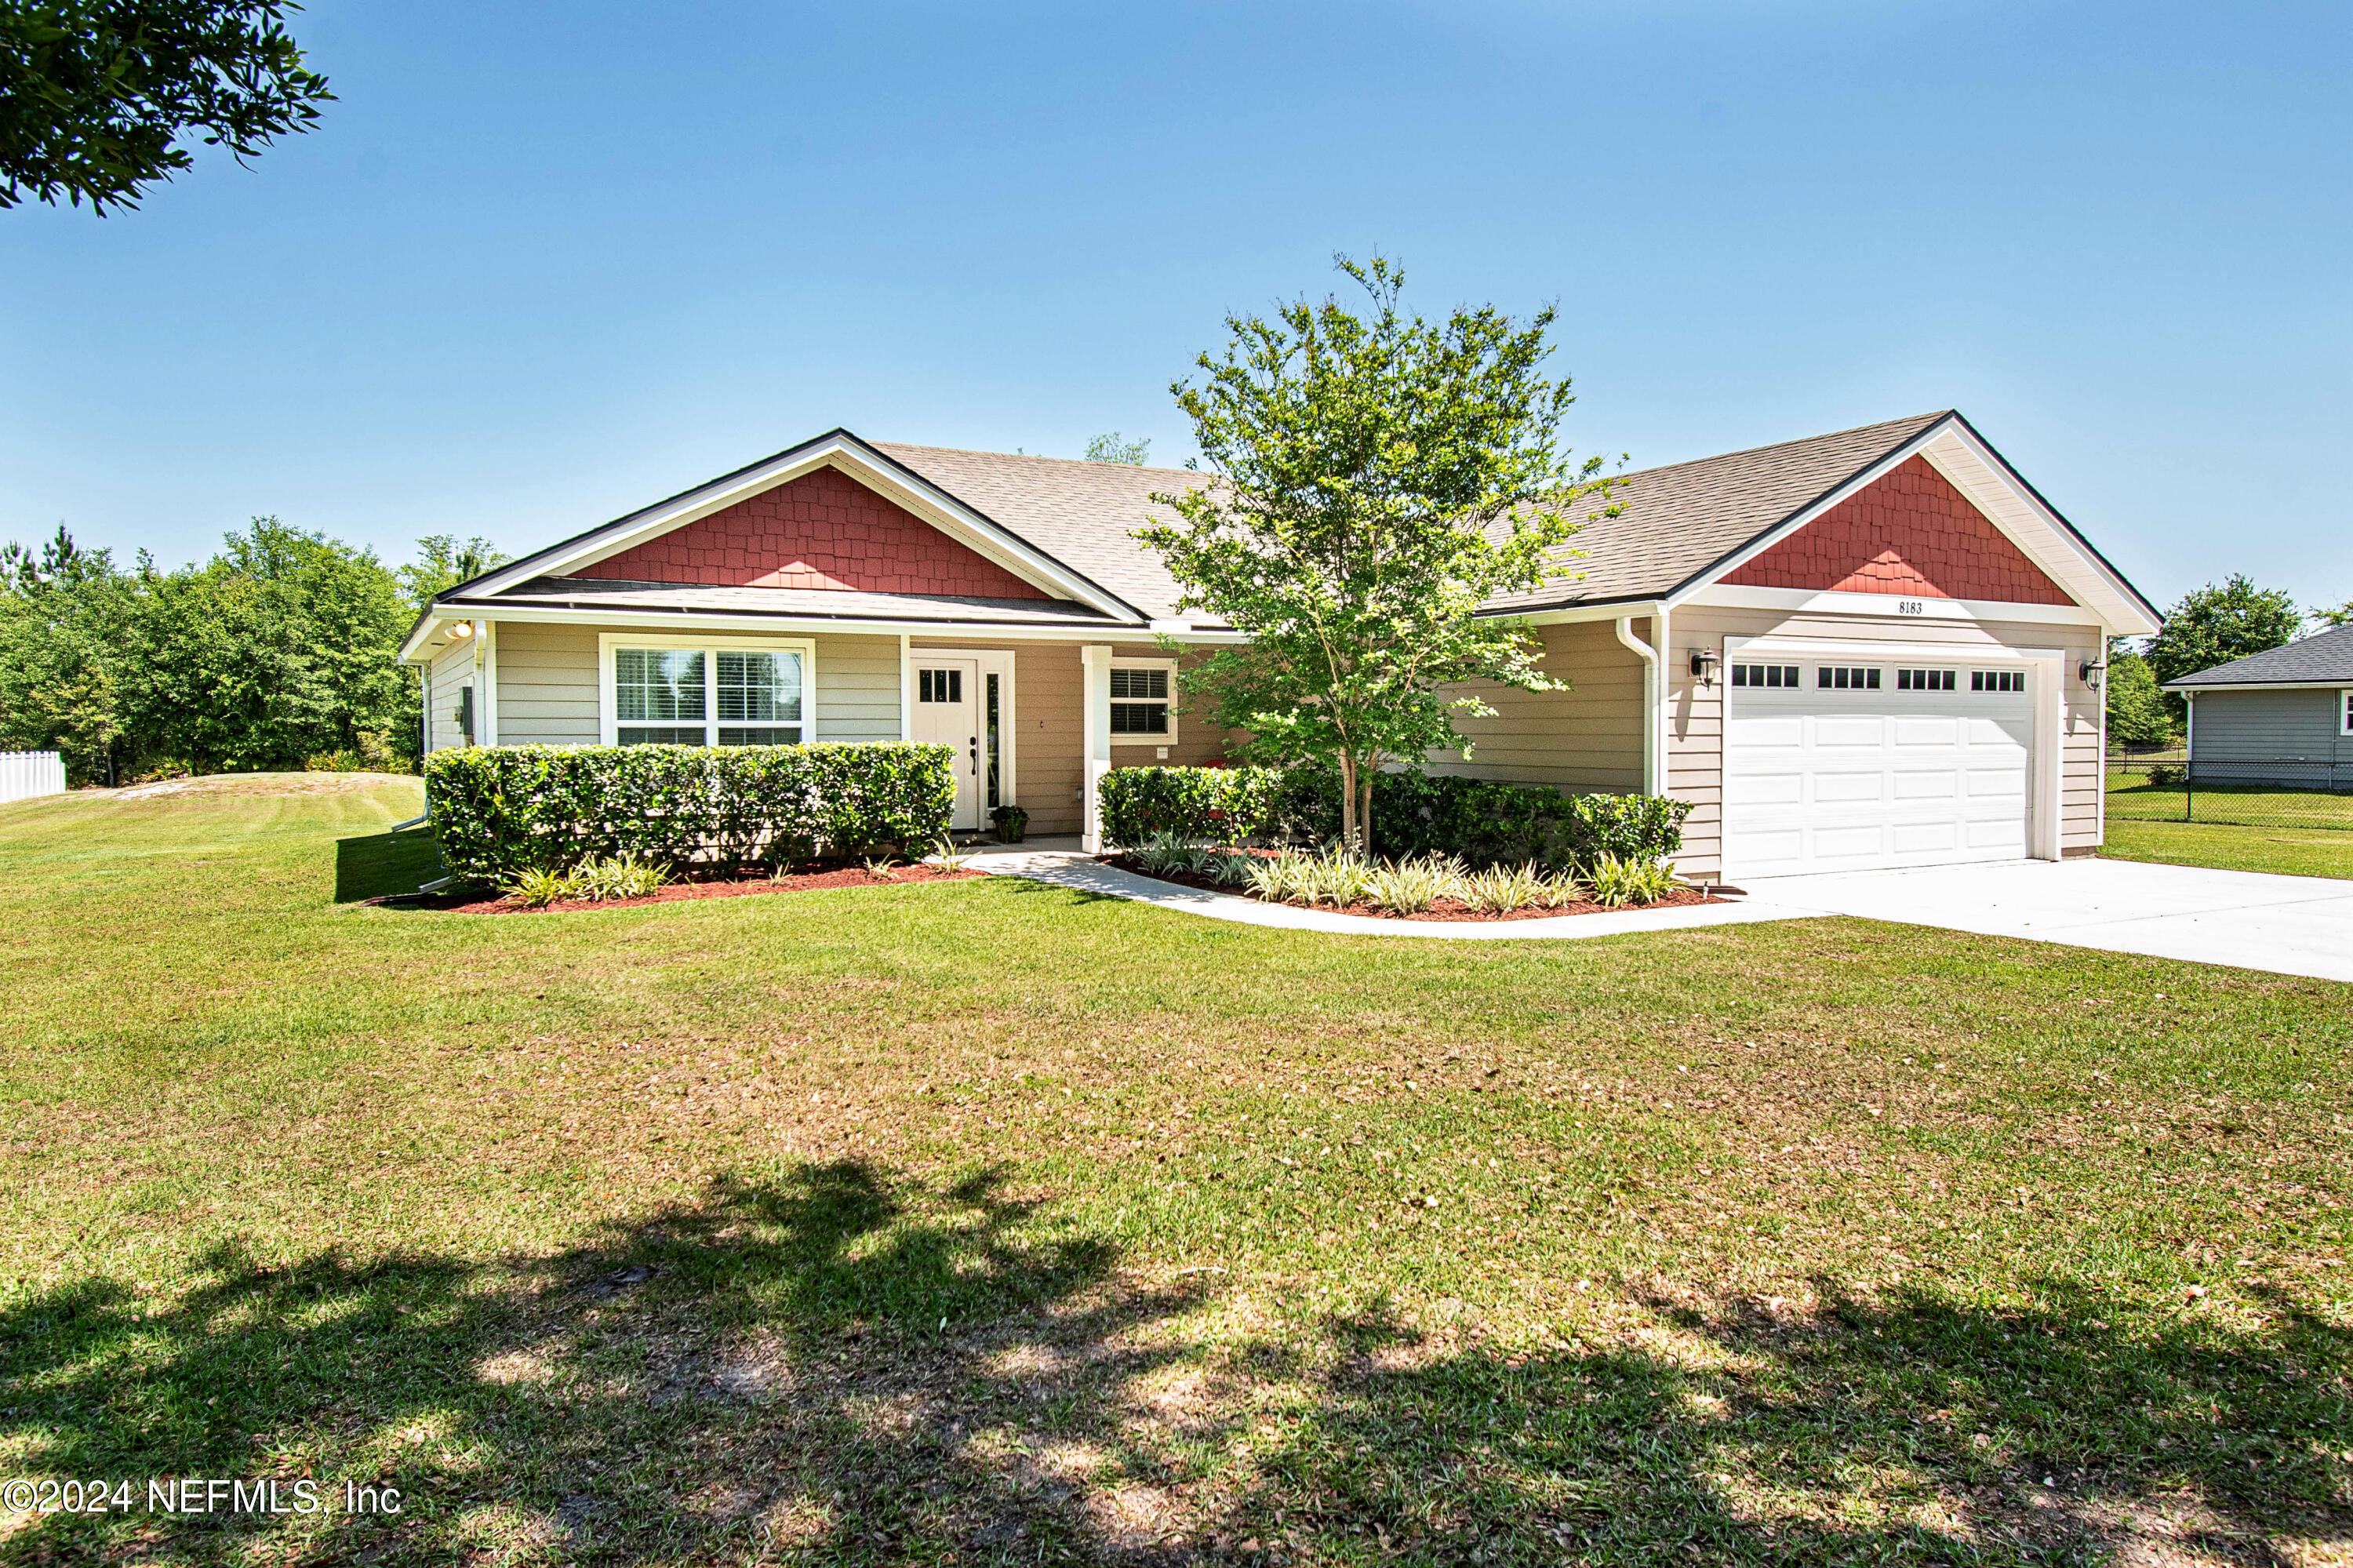 Glen St. Mary, FL home for sale located at 8183 Odis Yarborough Road, Glen St. Mary, FL 32040